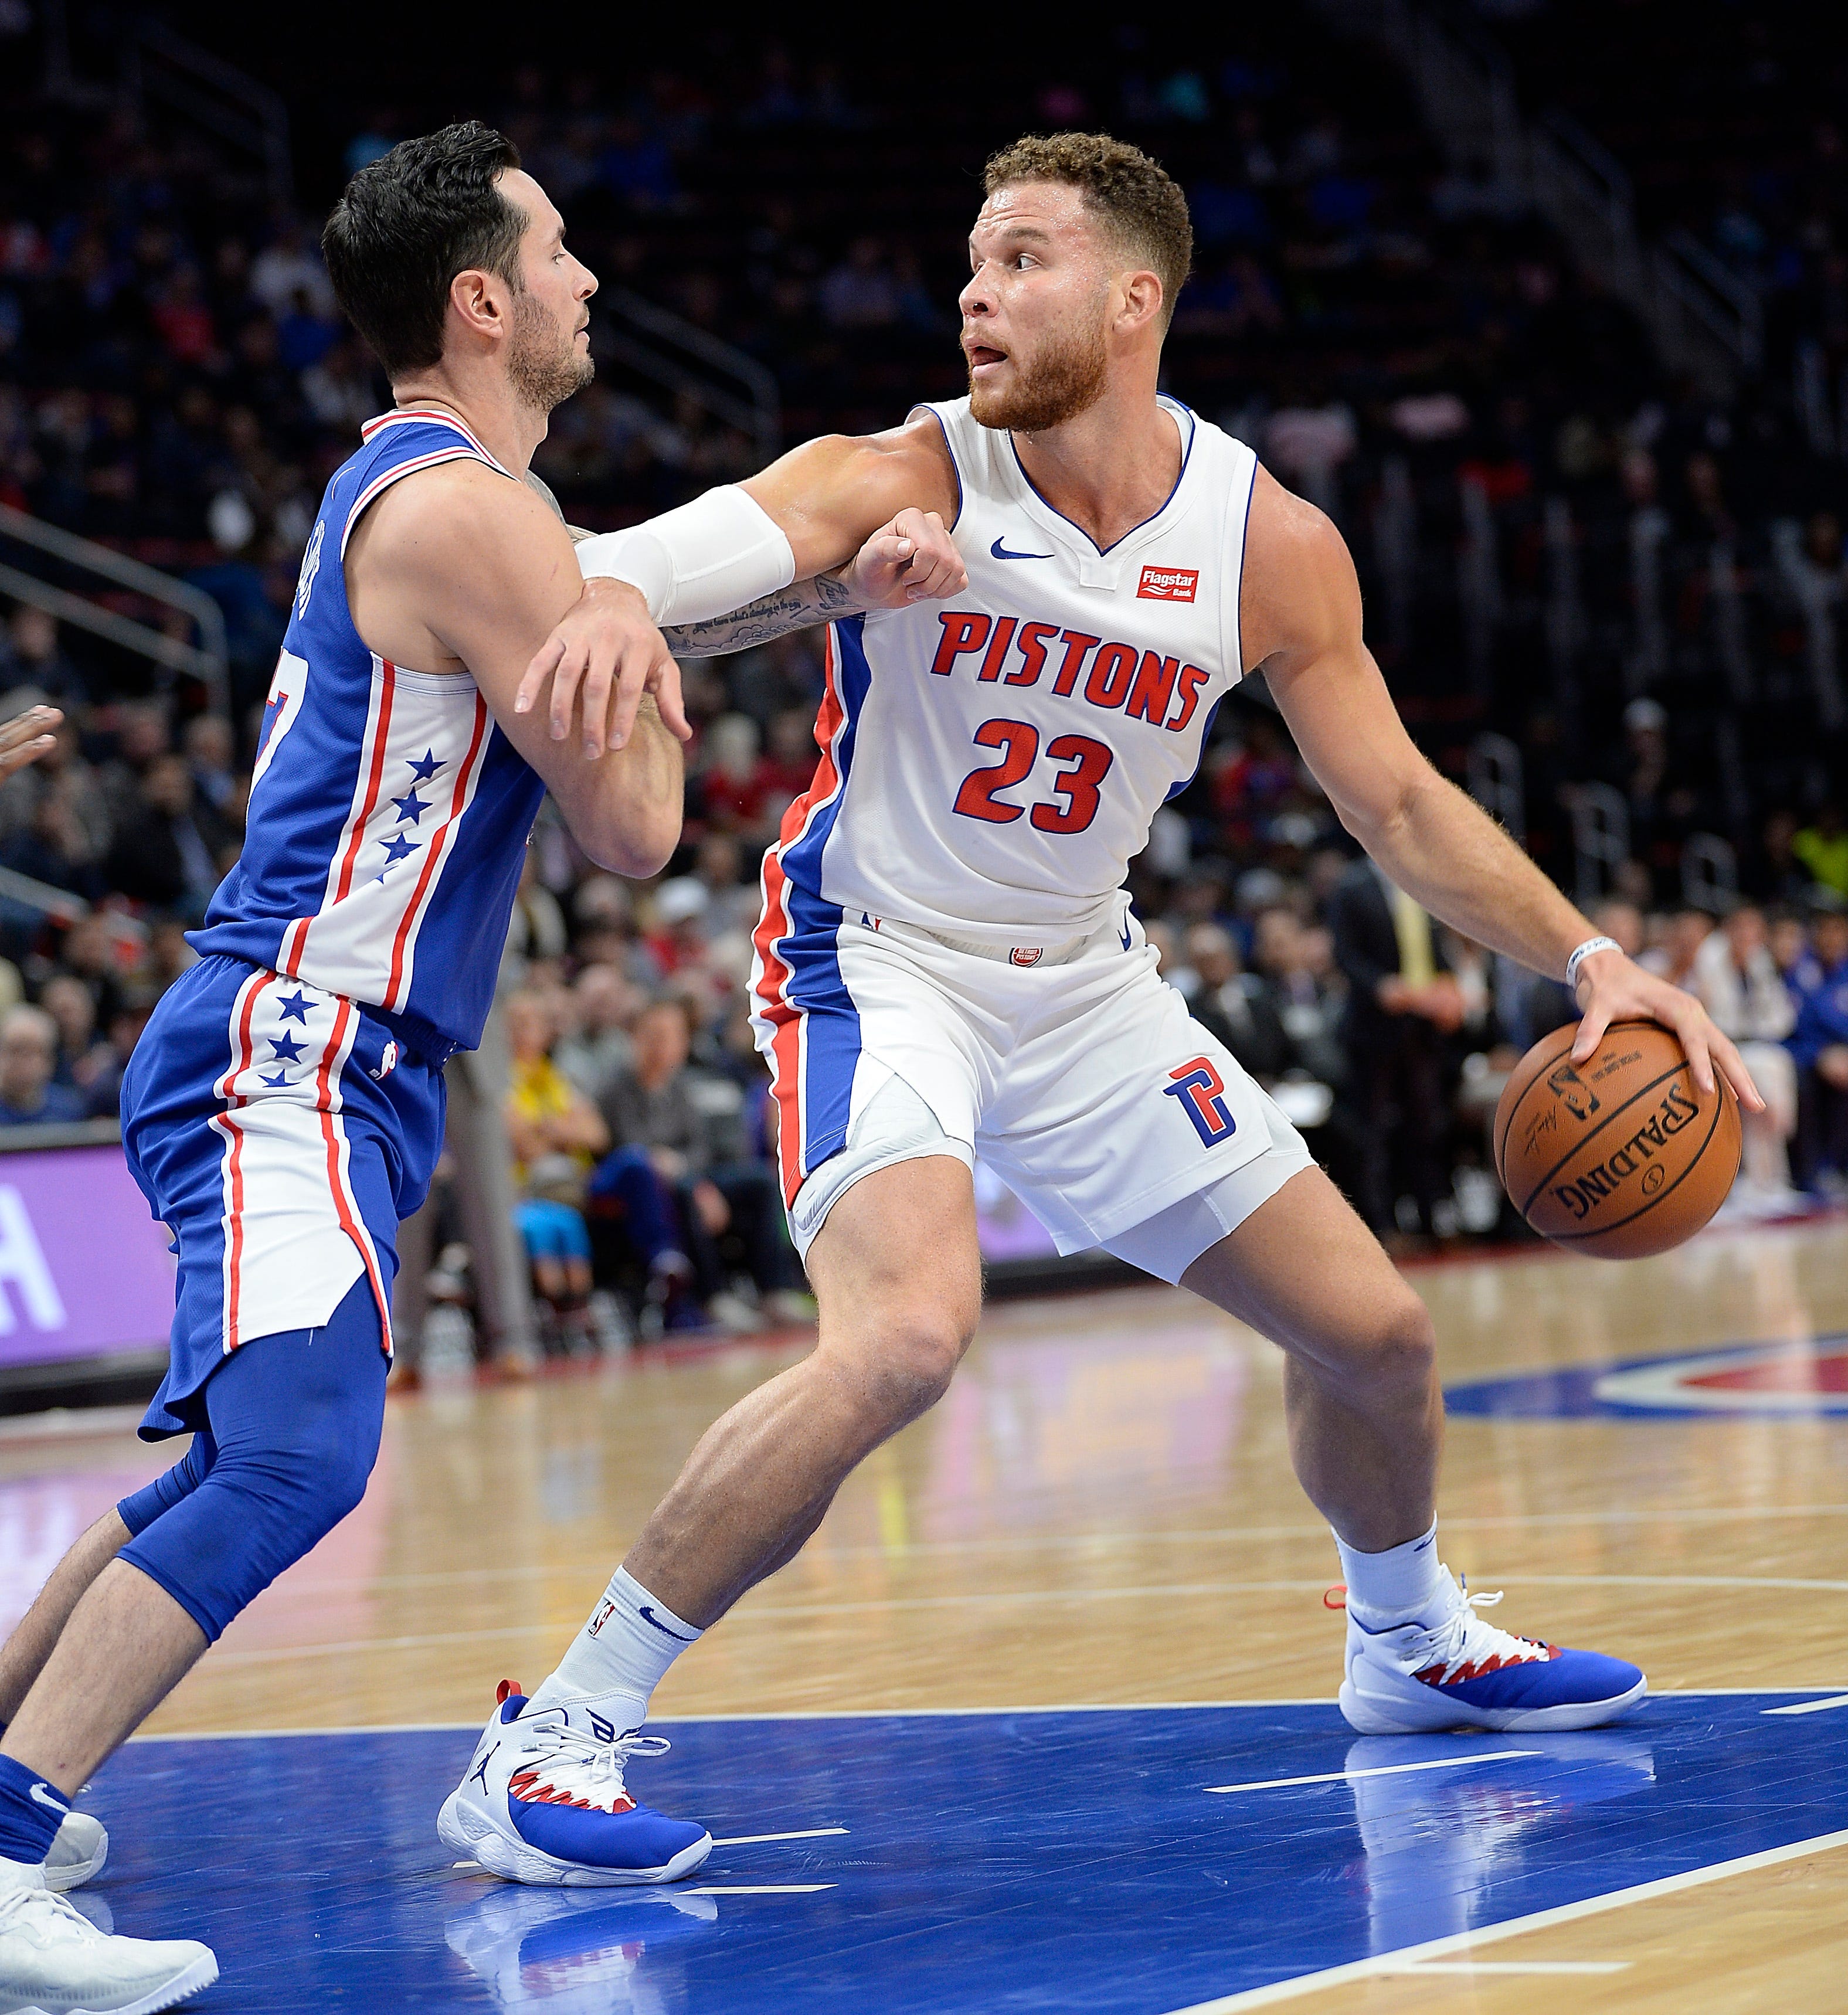 Pistons' Blake Griffin looks for room around 76ers' JJ Redick. Griffin finished with 50 points, including the winning three-point play.